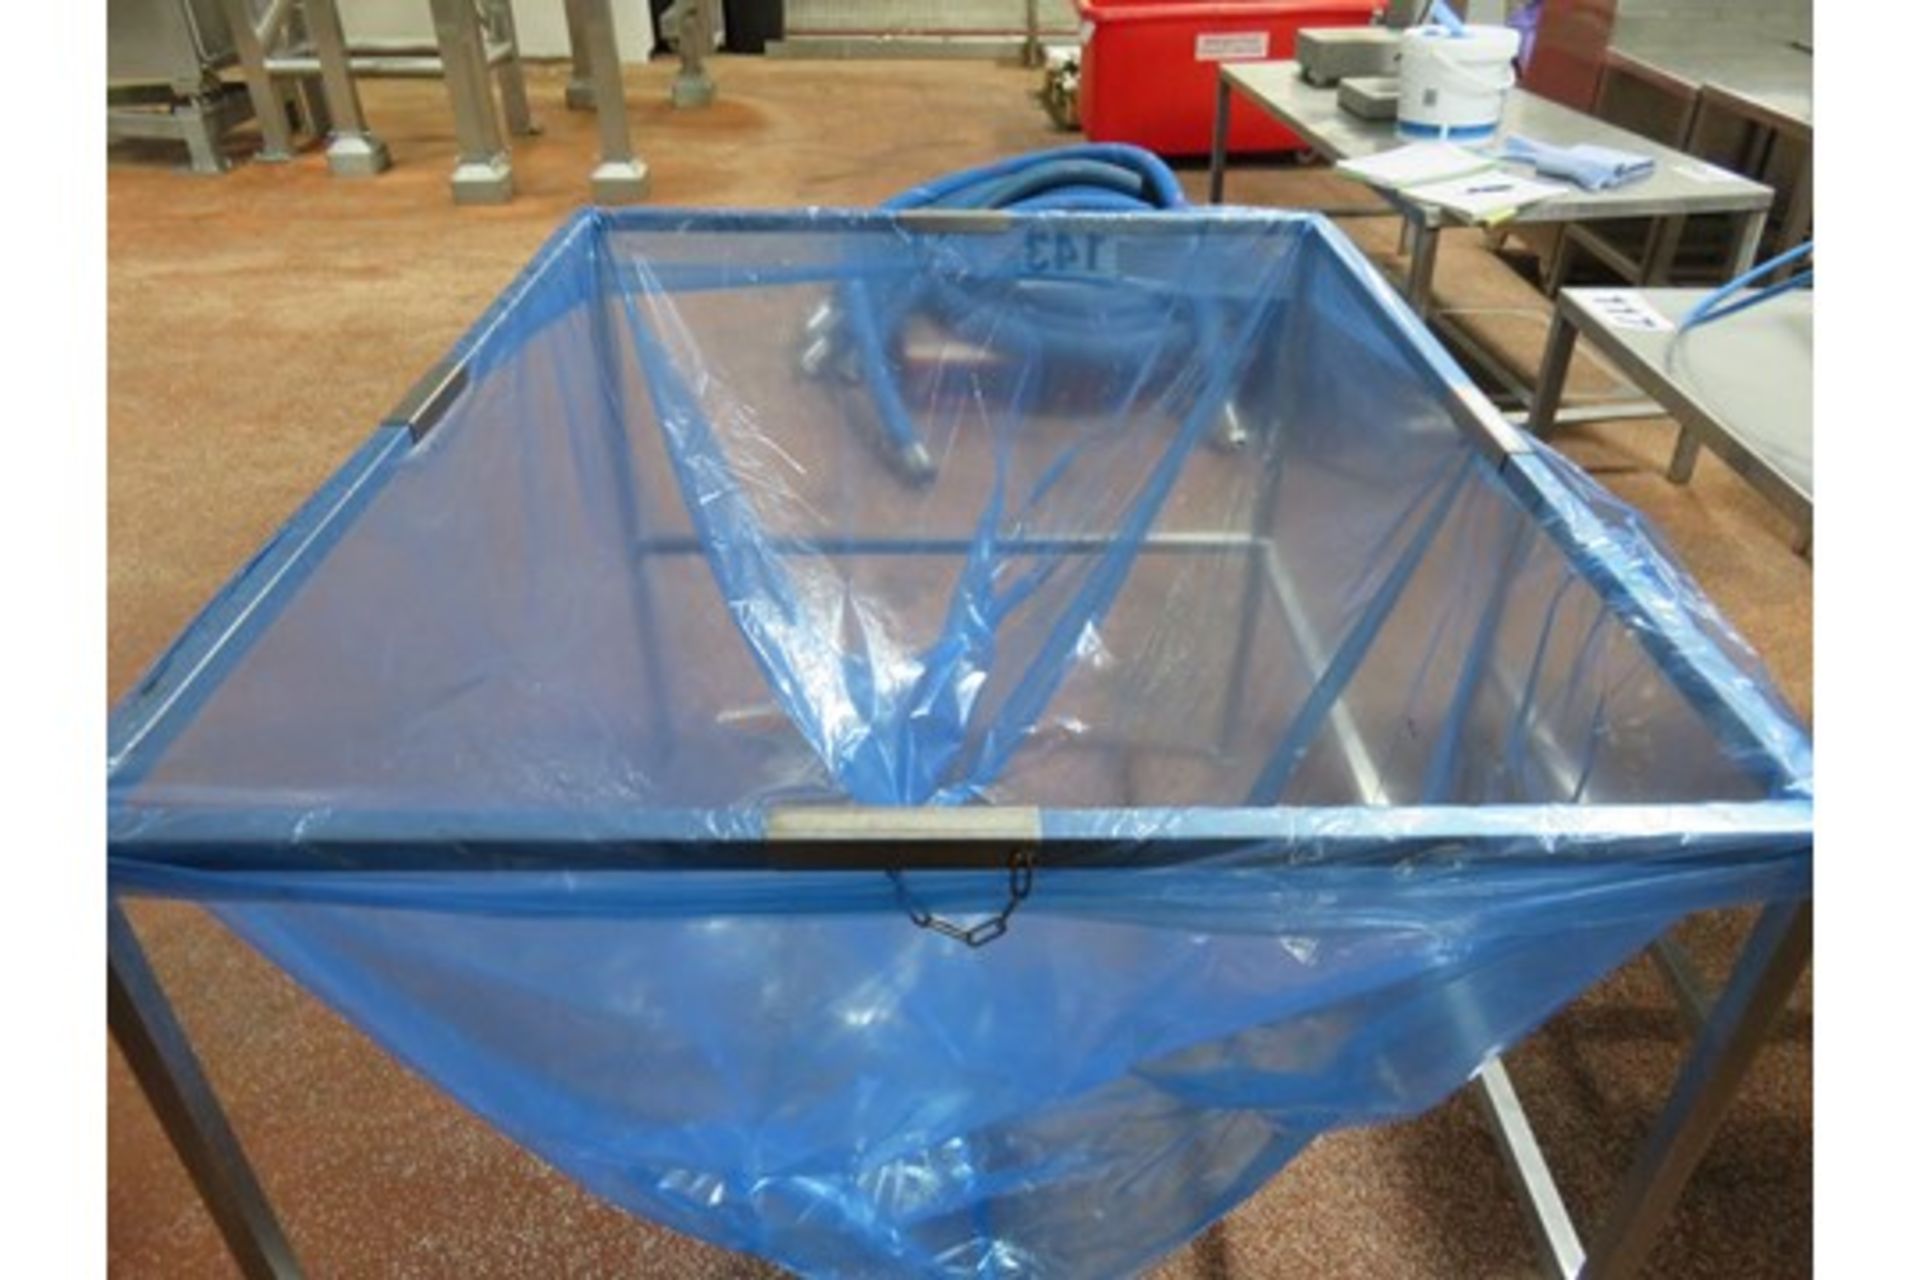 S/s bin liner Holders 1200mm x 1300mm x 960mm high. Lift Out £20